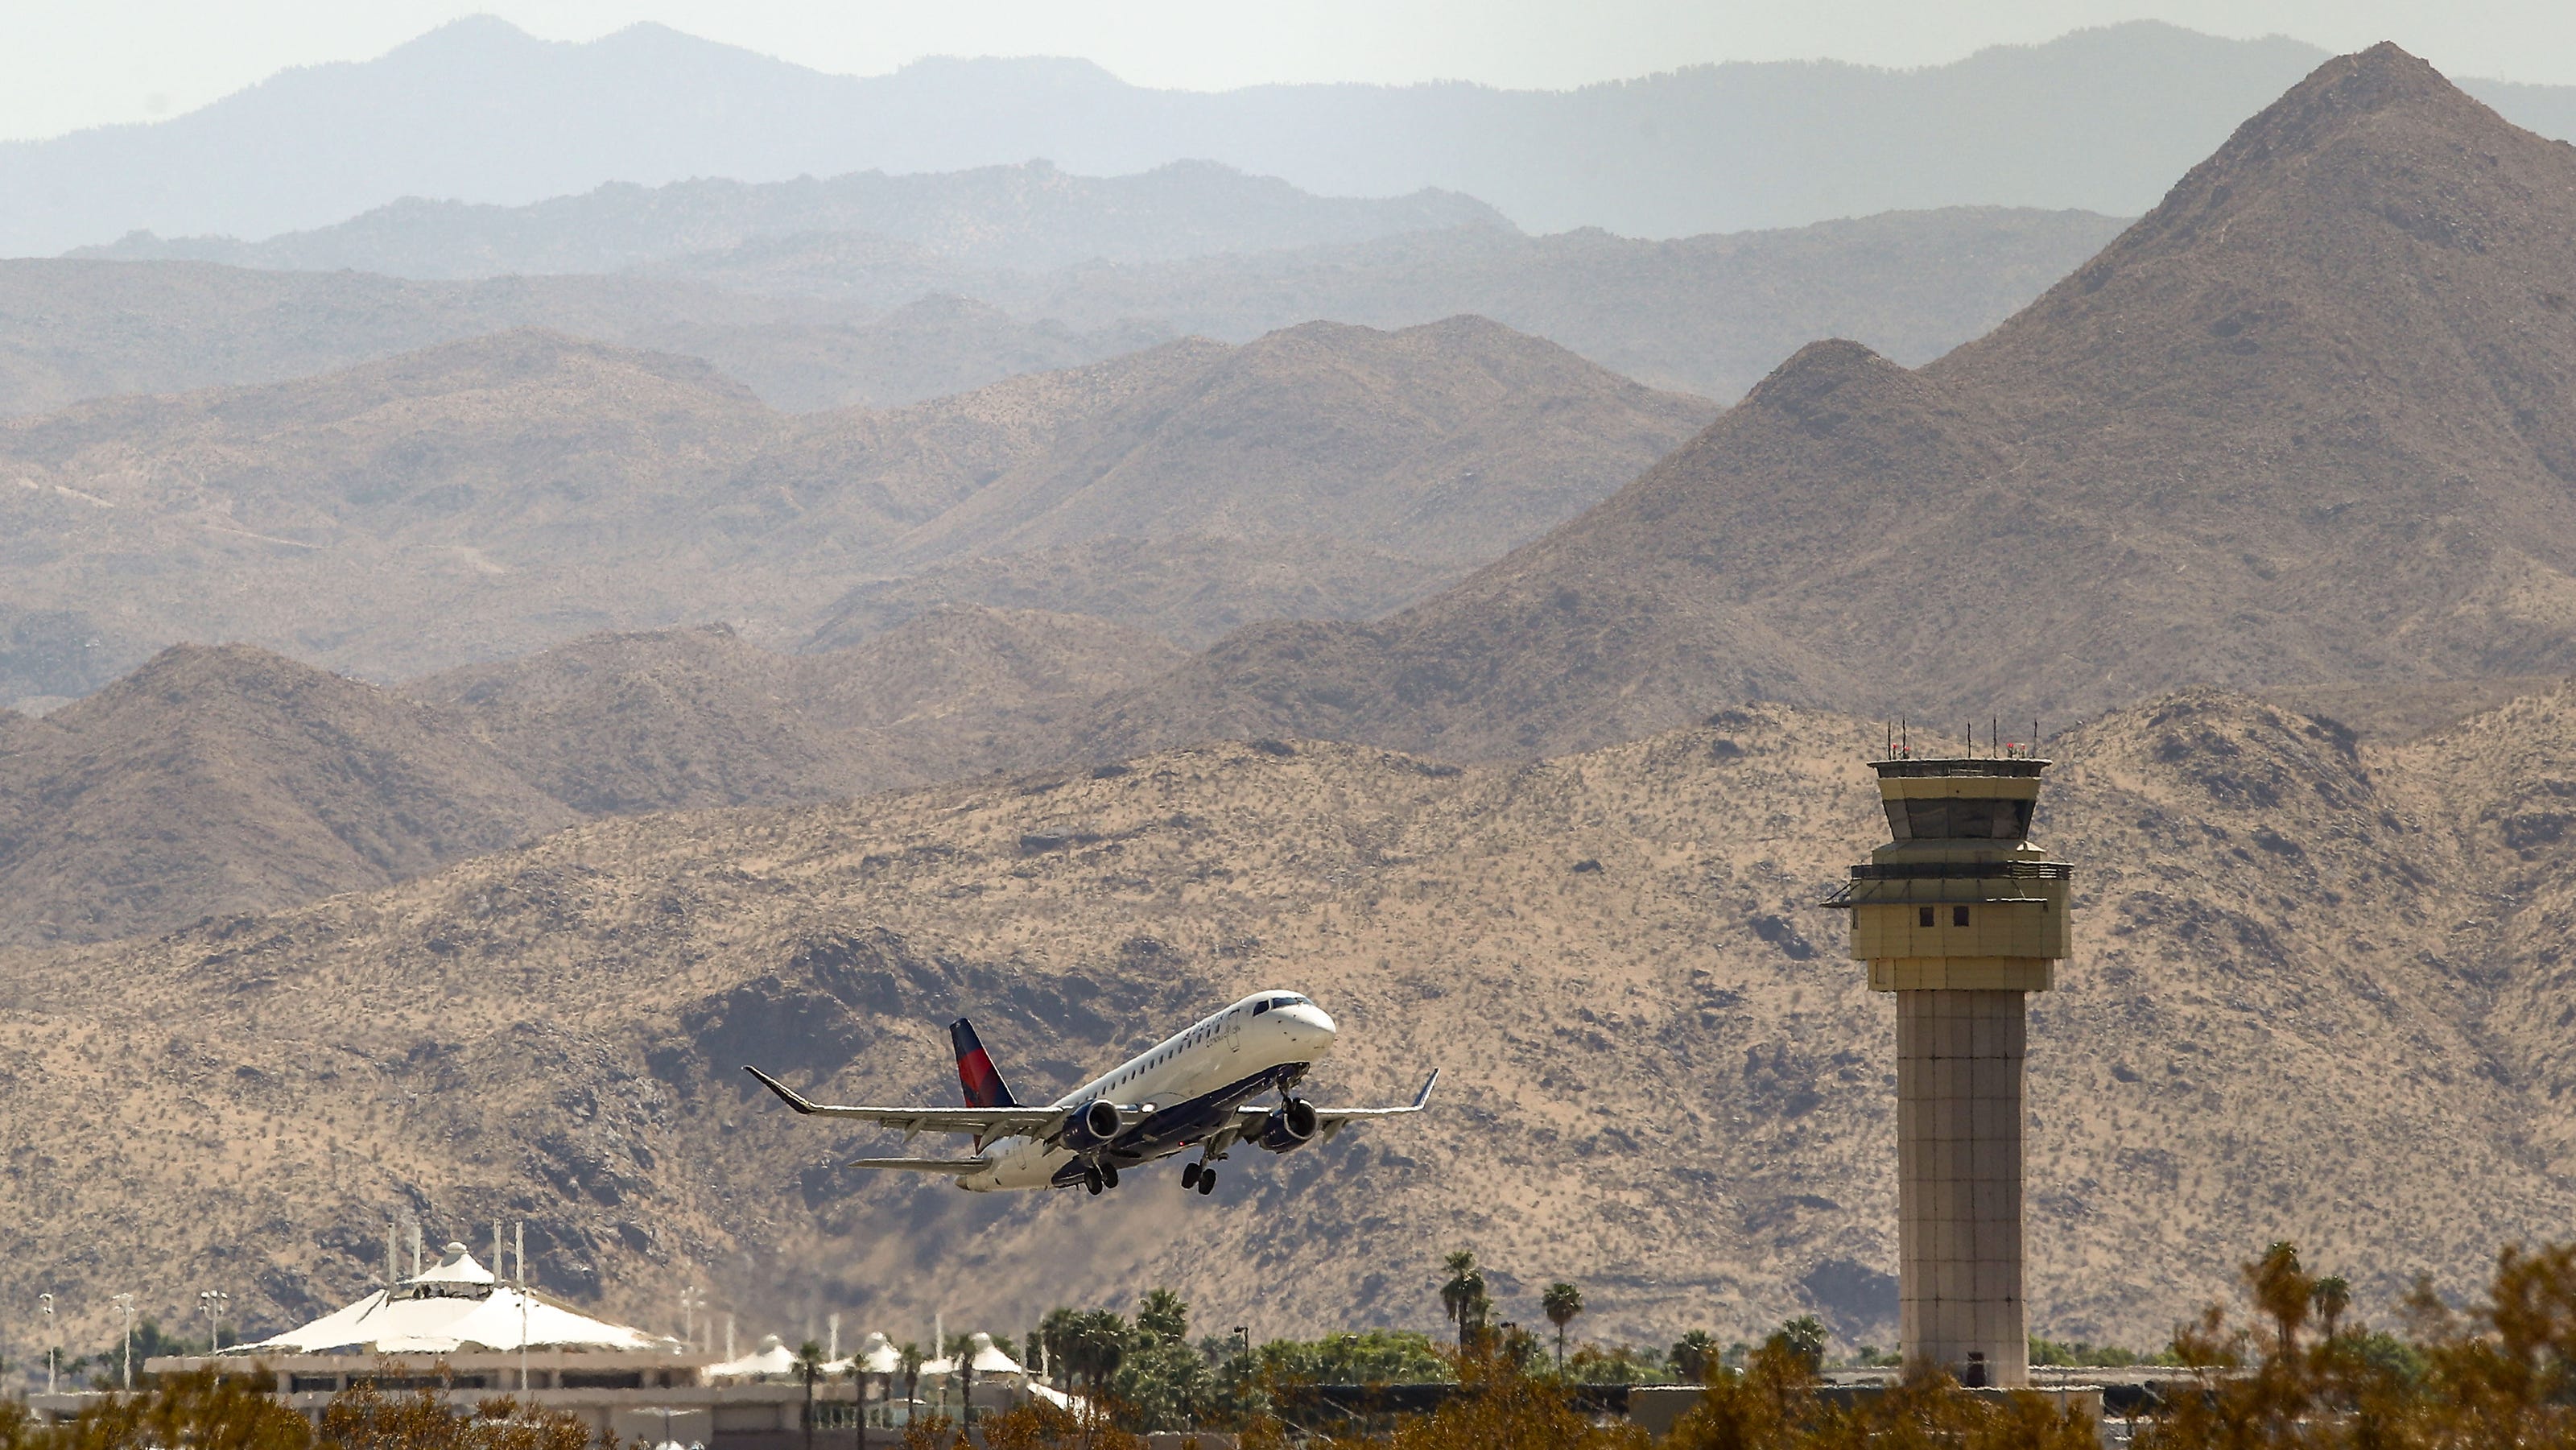 Delta Airlines adds daily flights between Palm Springs and Los Angeles